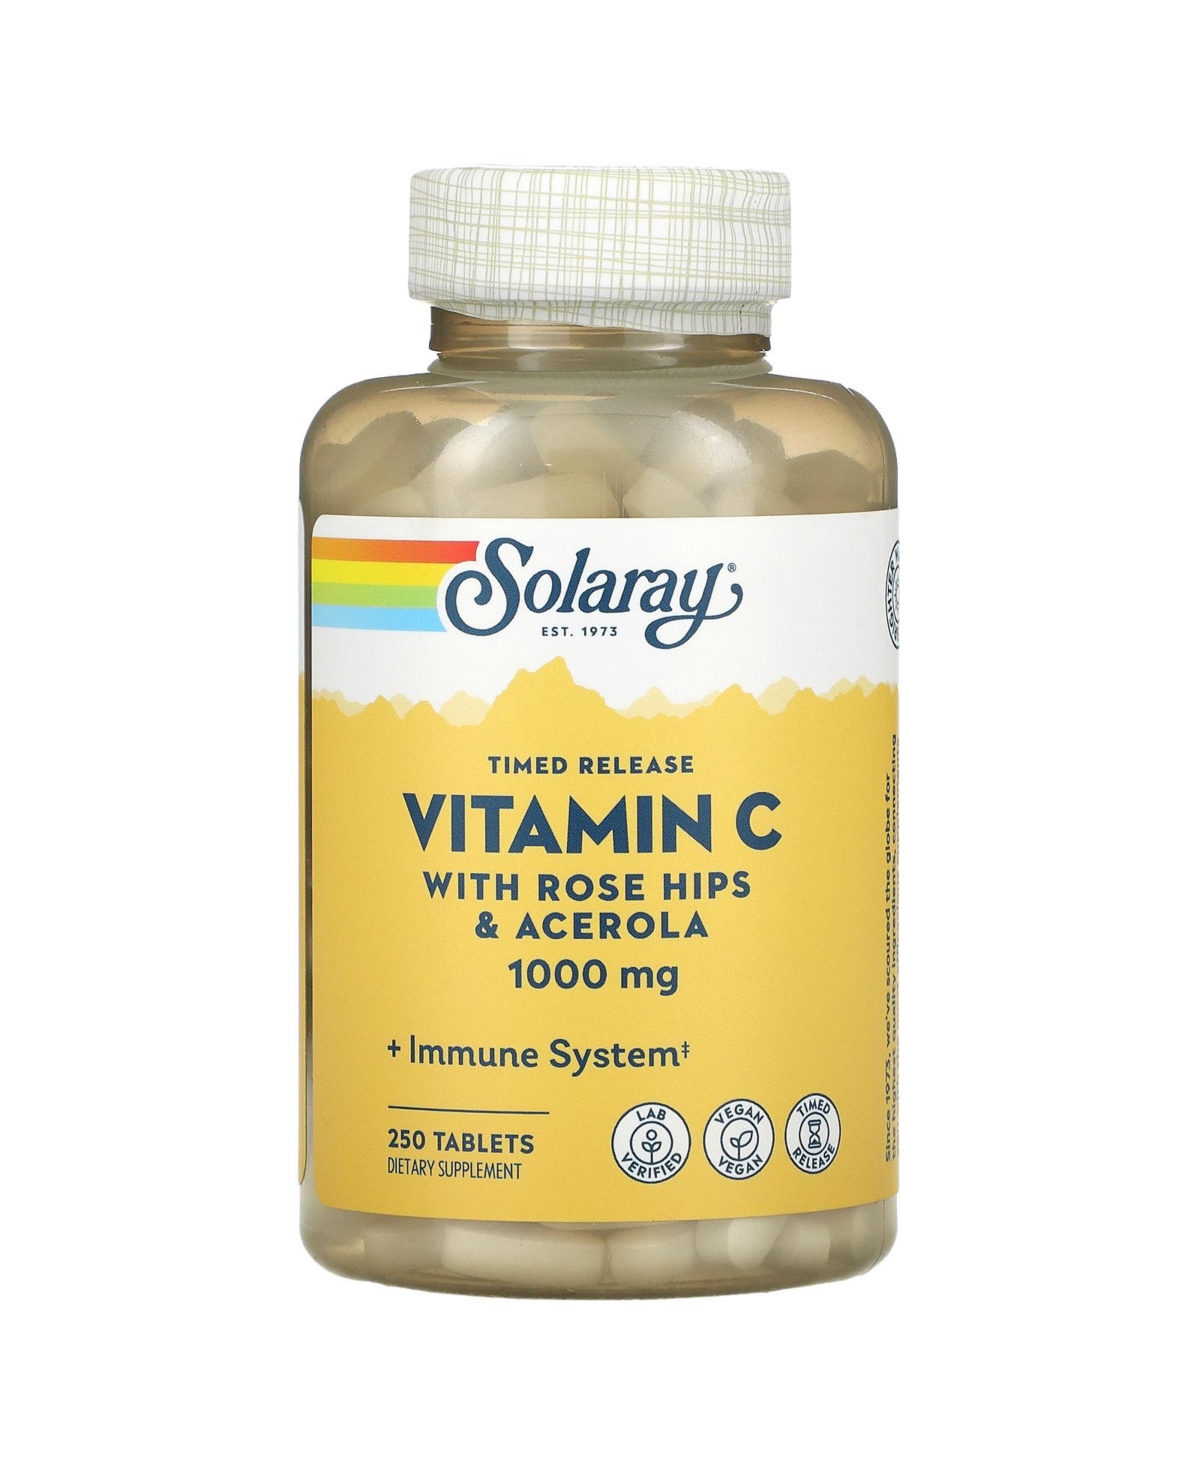 Timed Release Vitamin C with Rose Hips & Acerola 1 000 mg - 250 Tablets - Assorted Pre-pack (See Table